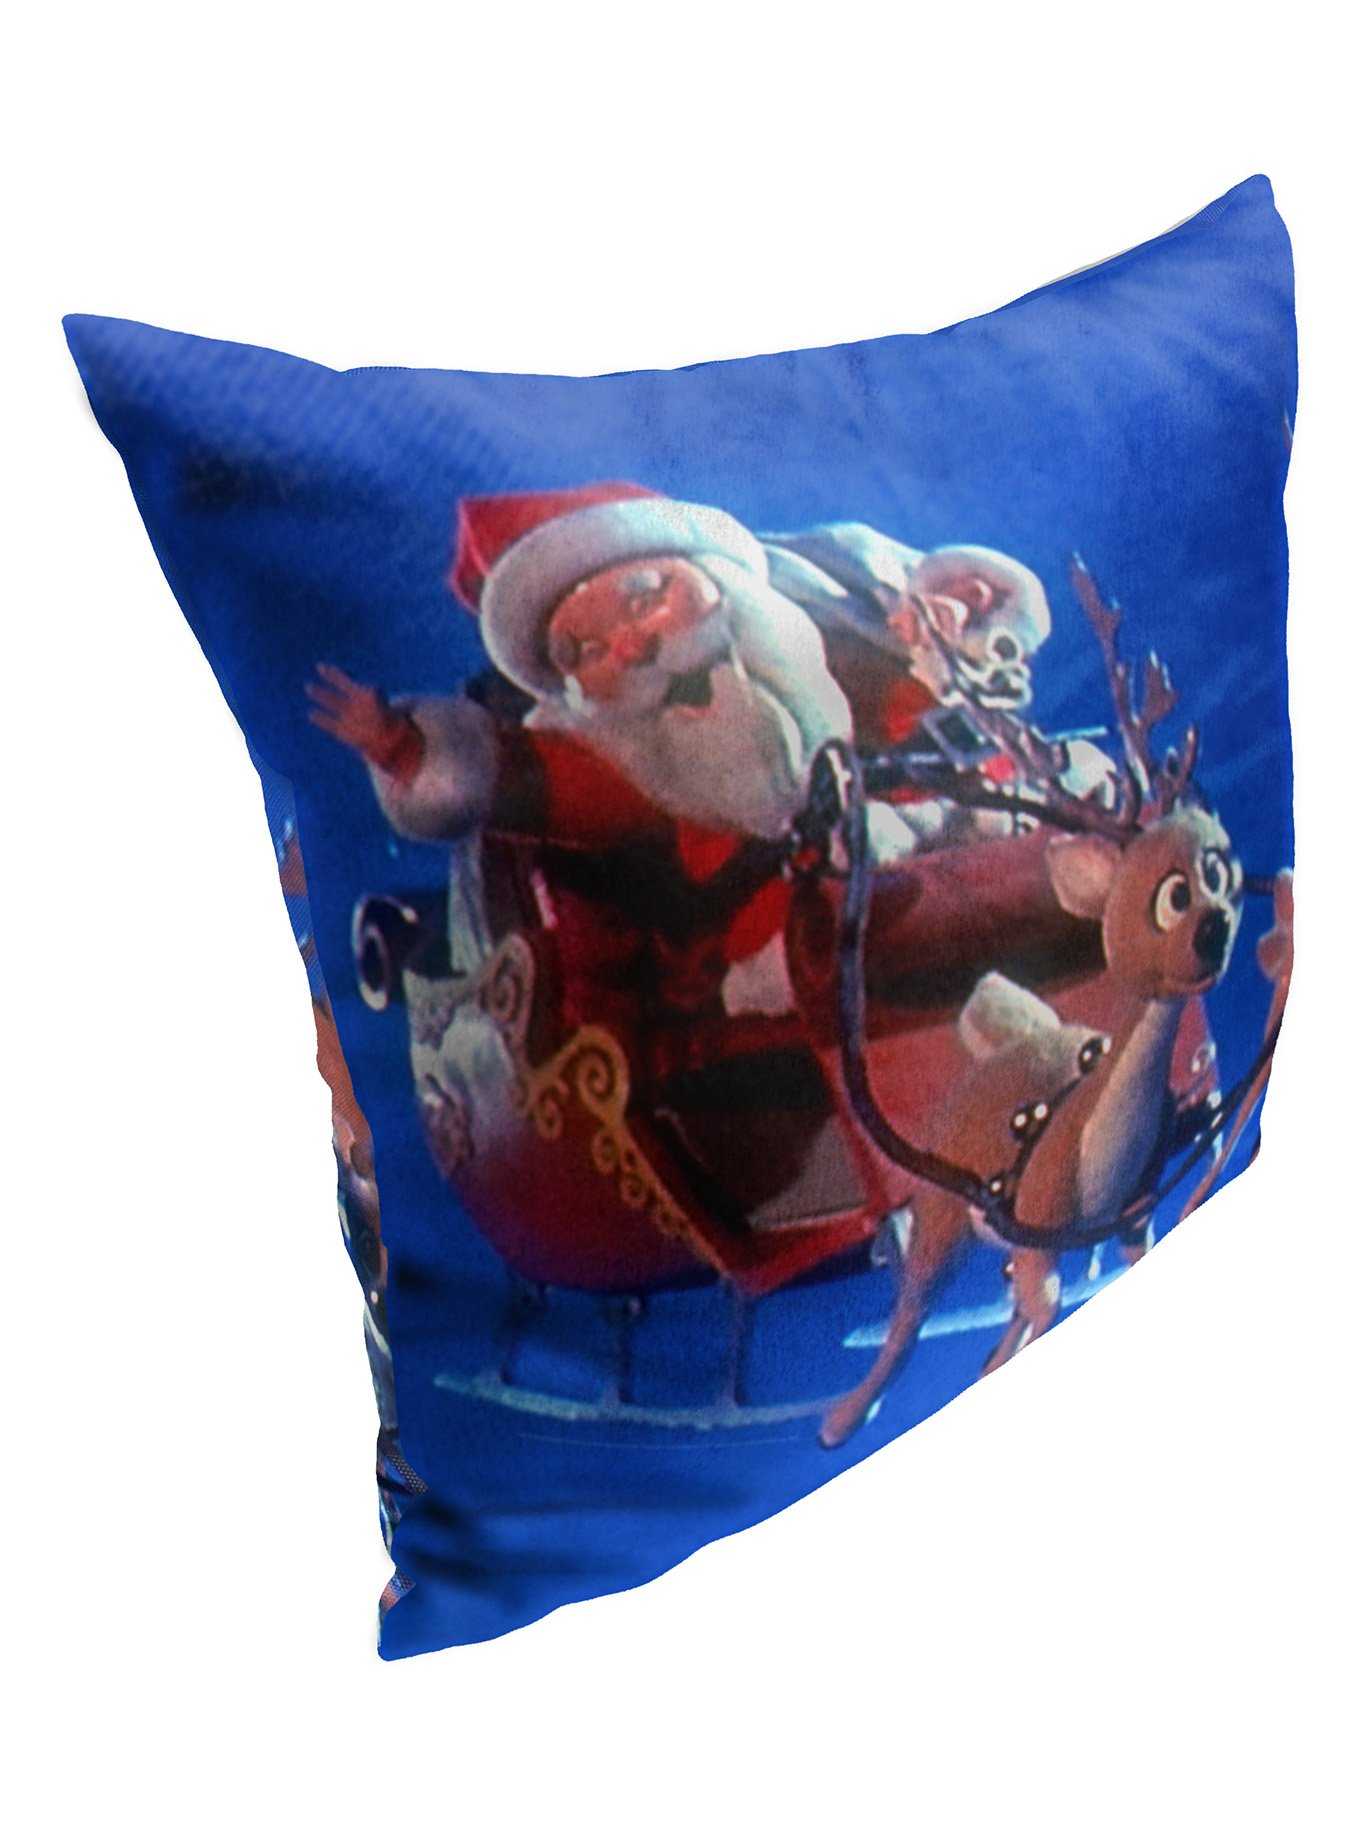 Year Without A Santa Claus Here Comes Santa Printed Throw Pillow, , hi-res